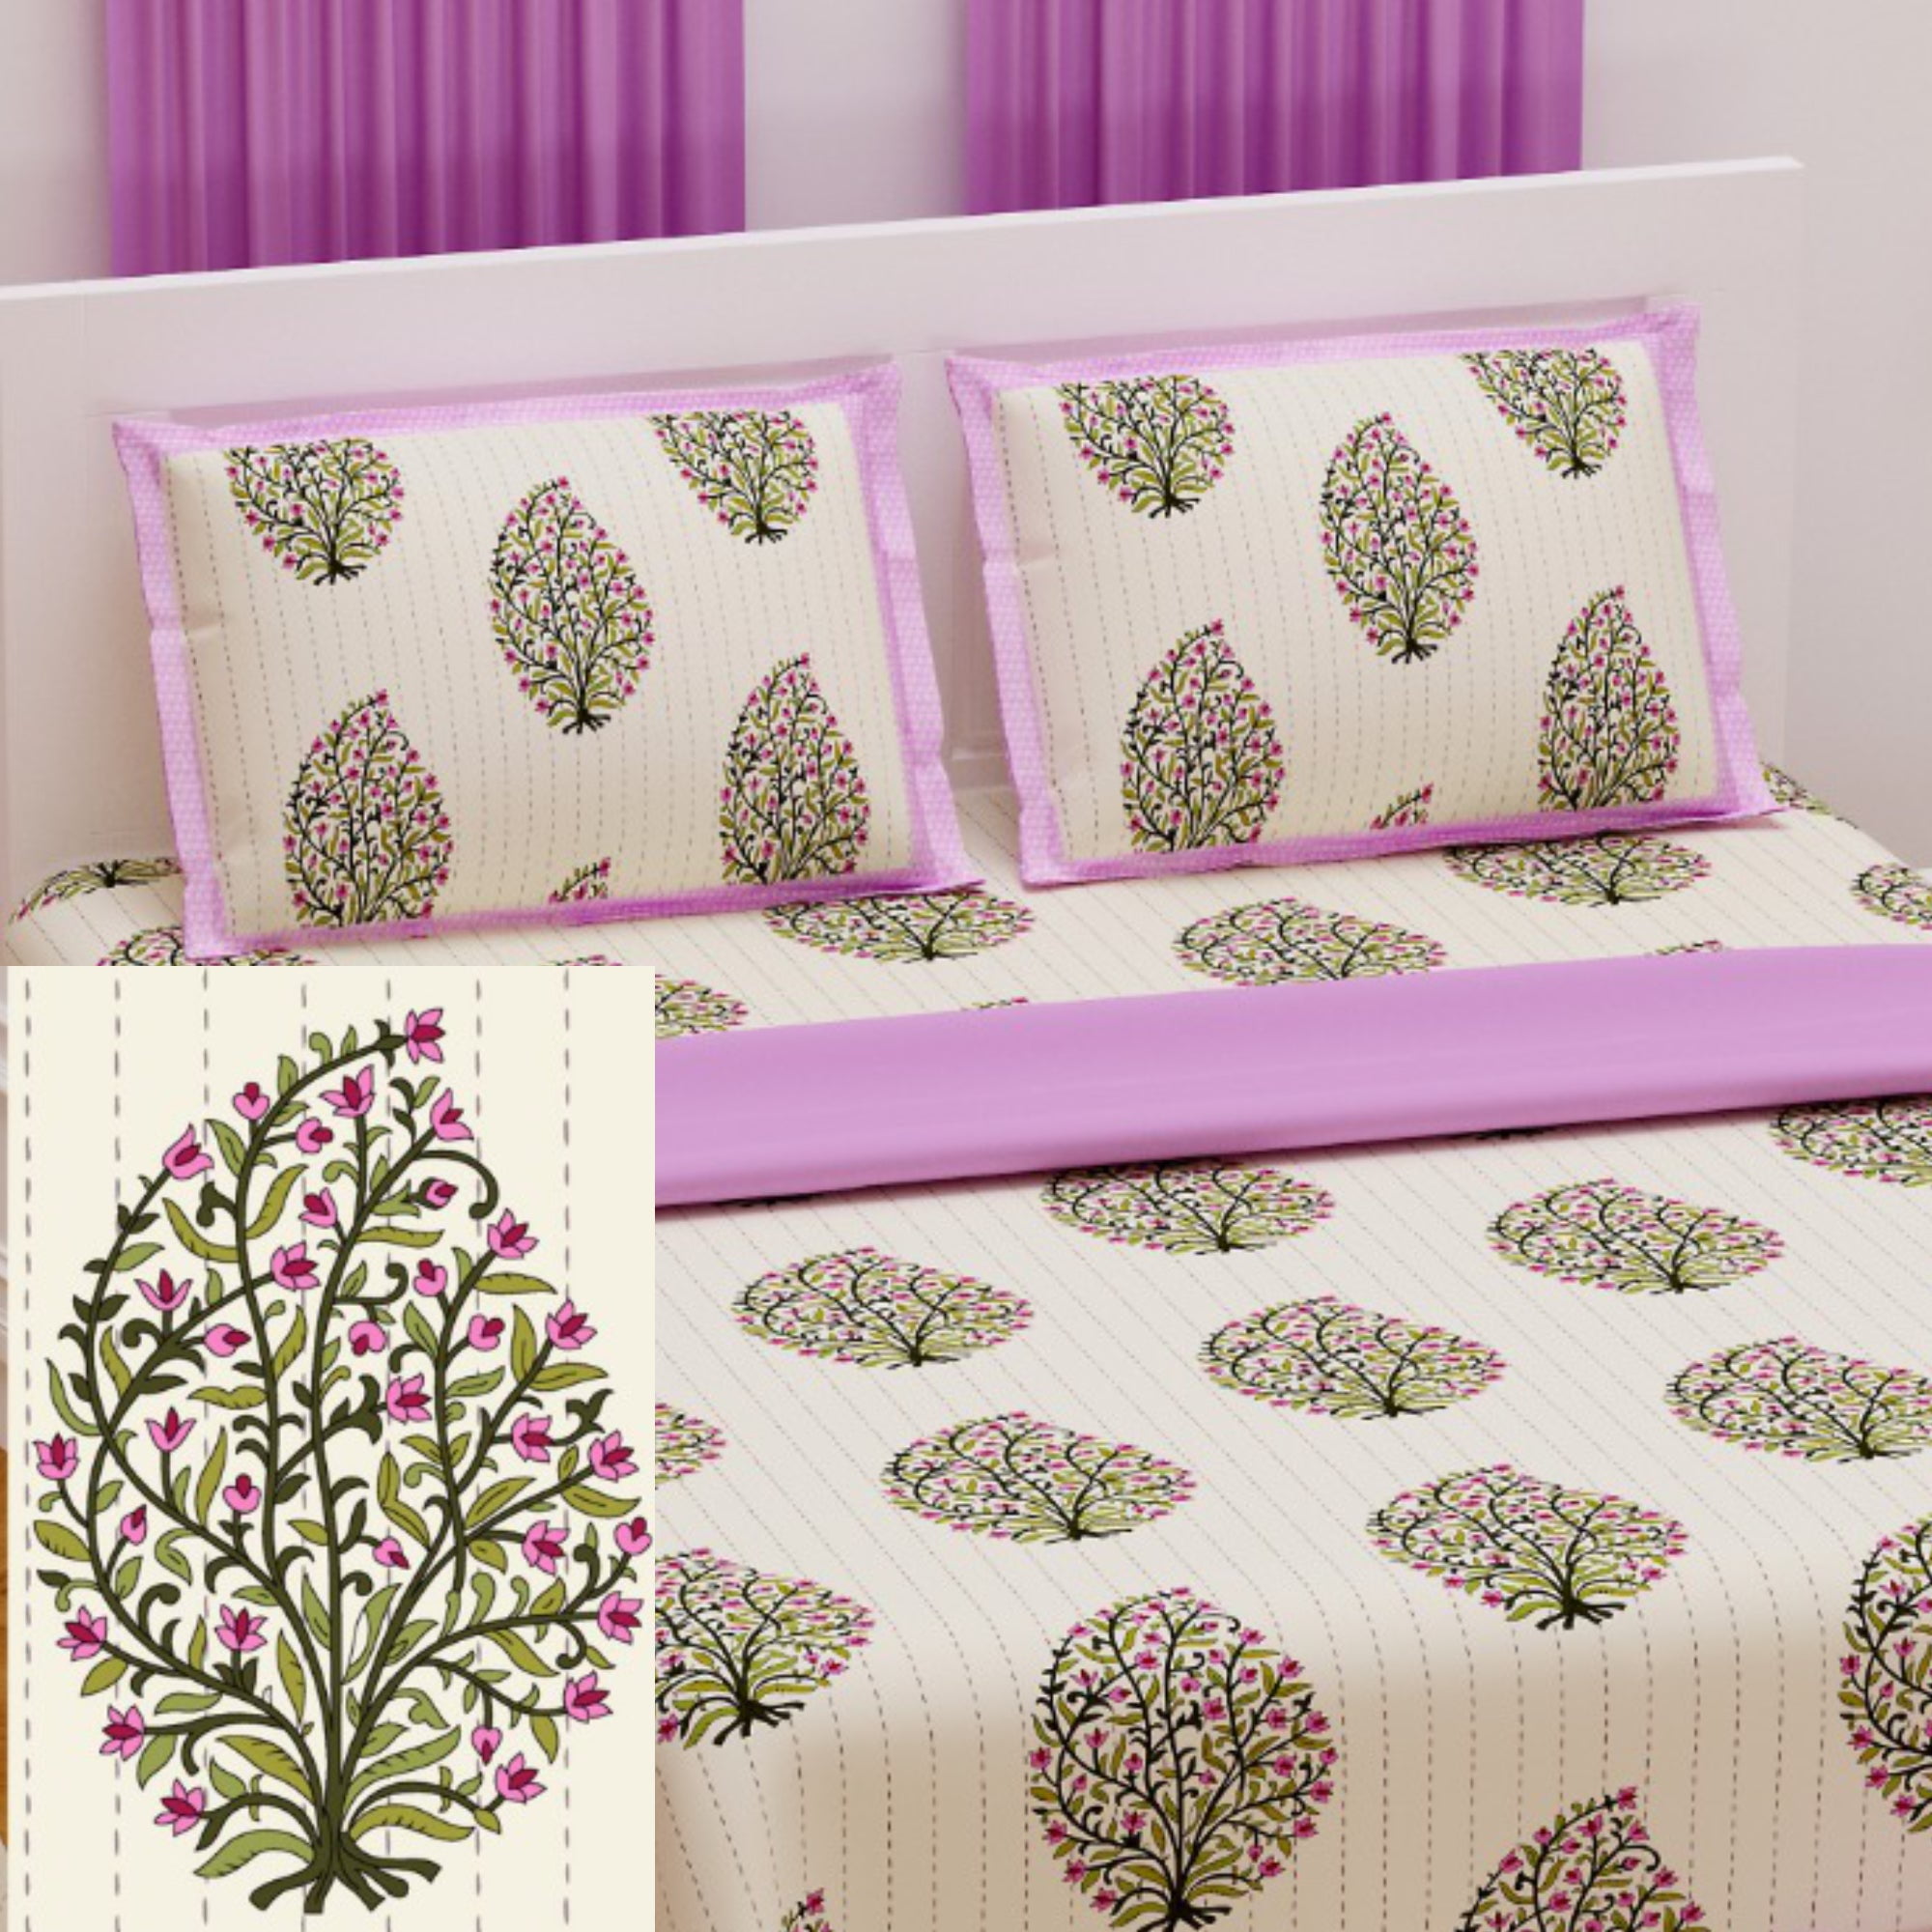 Indian Ethnic  Elephant 100% Cotton Queen Size Bed Sheet Pillow Case Bedding Set 